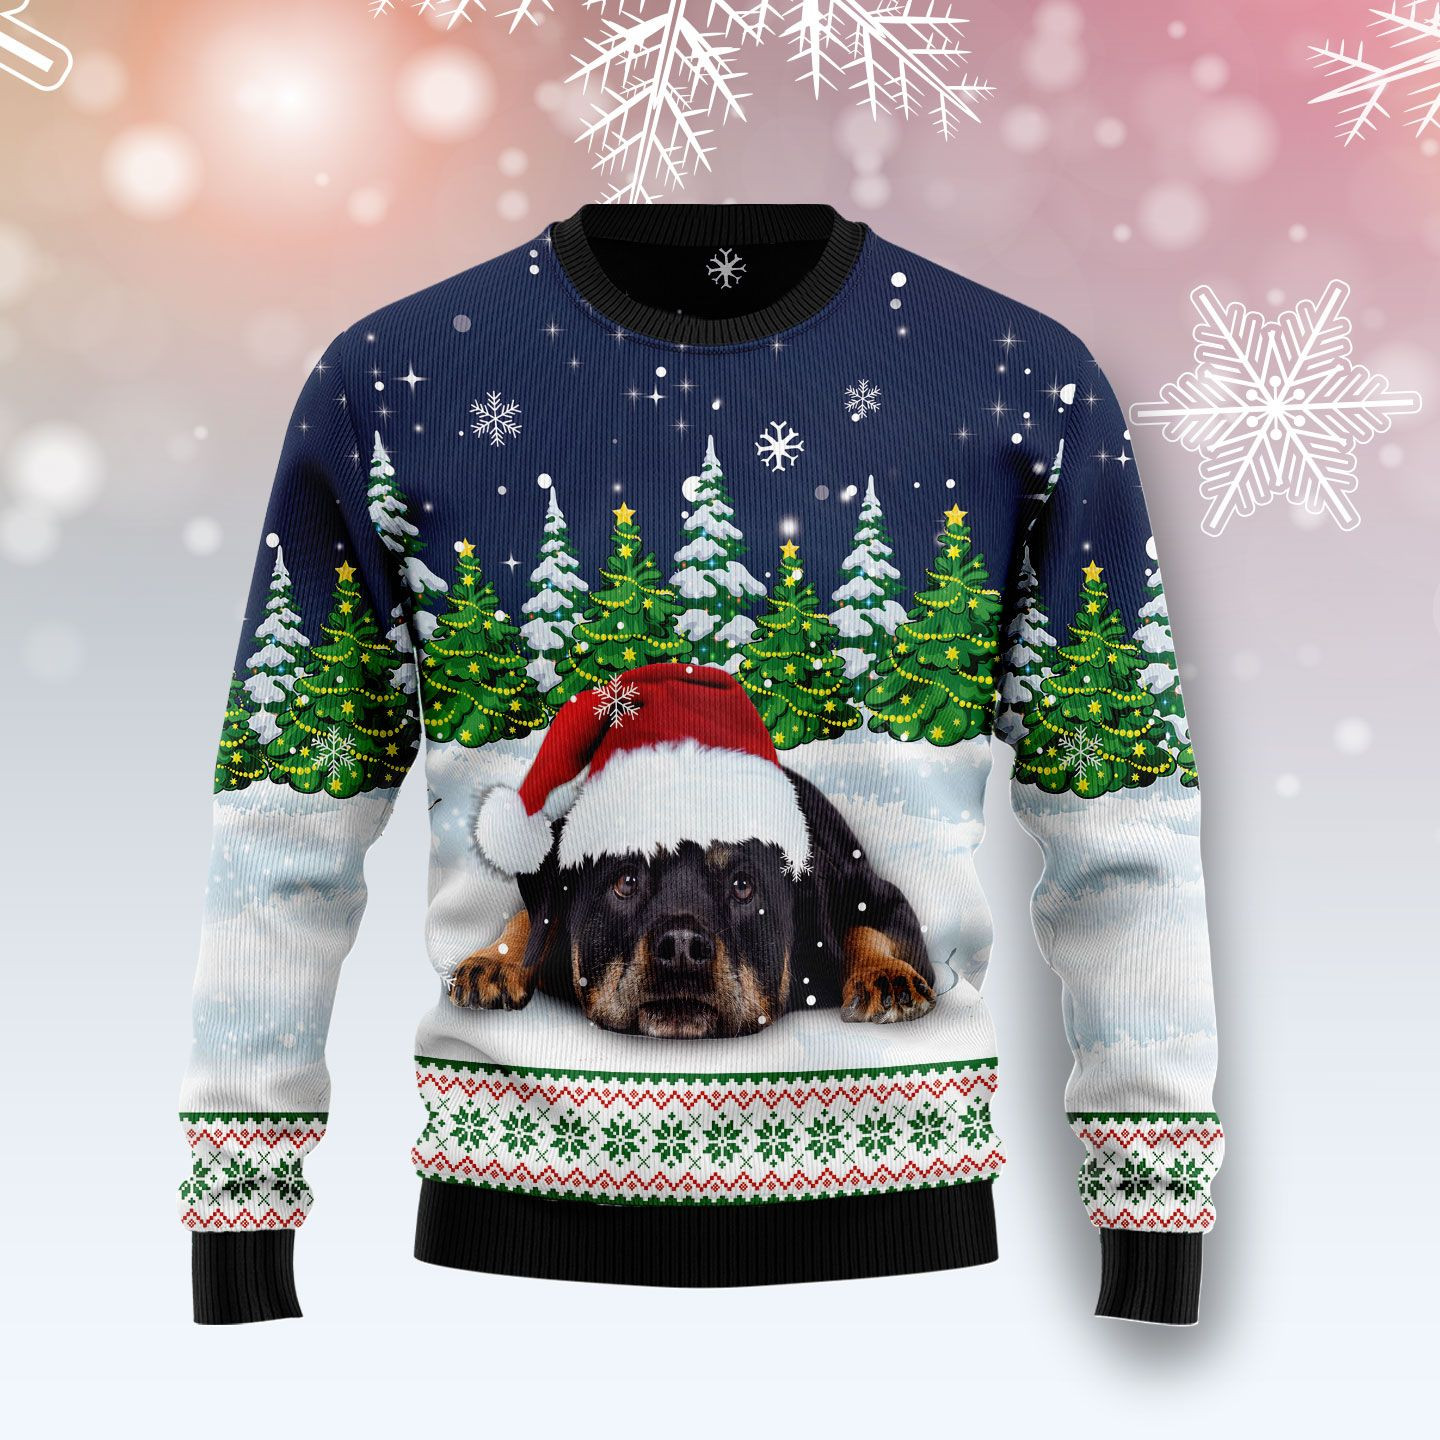 Dreaming Rottweiler Under Snow Ugly Christmas Sweater Ugly Sweater For Men Women